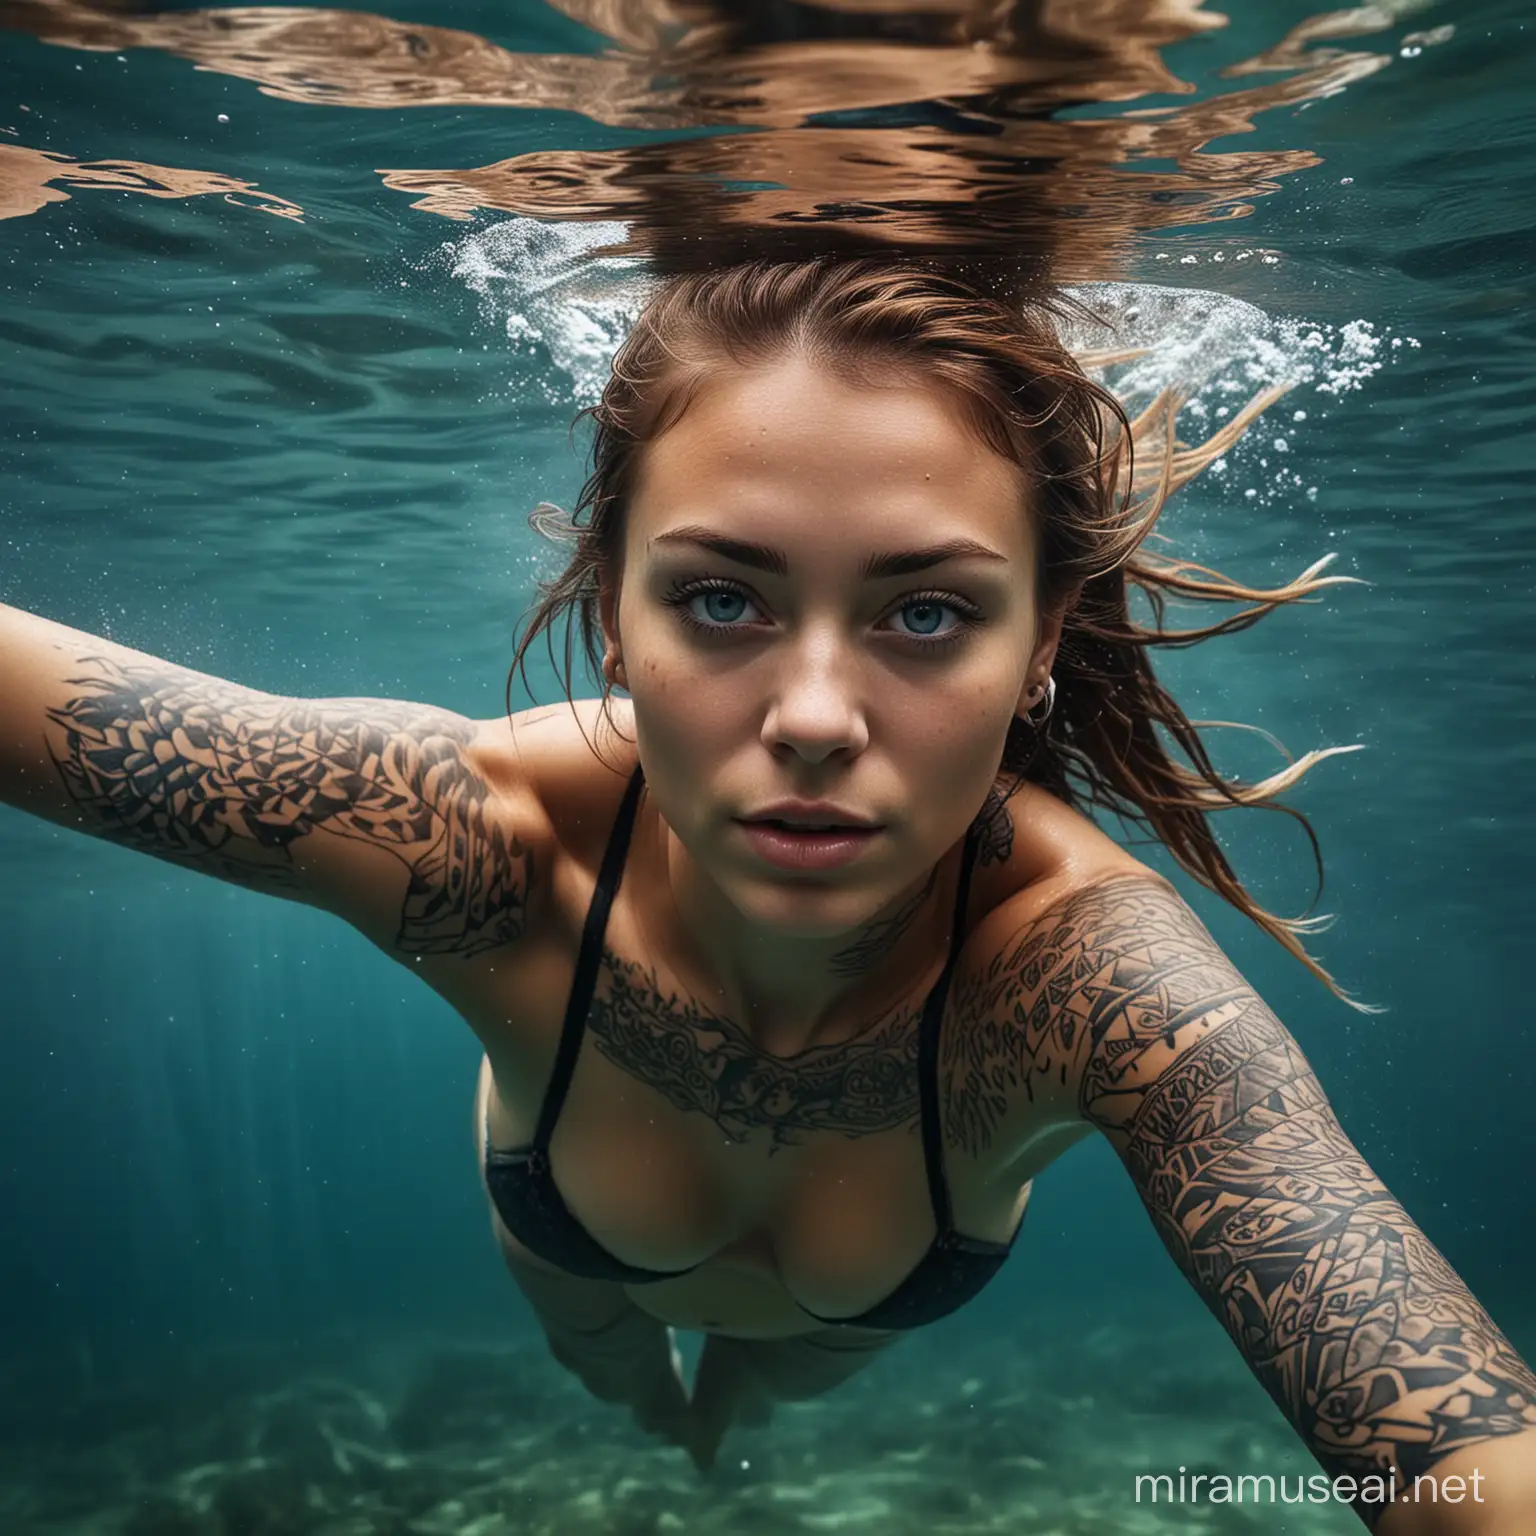 photography, create image realistic. beautiful tribe woman with tattooes on body, diving under water, brown hair, blue eyes